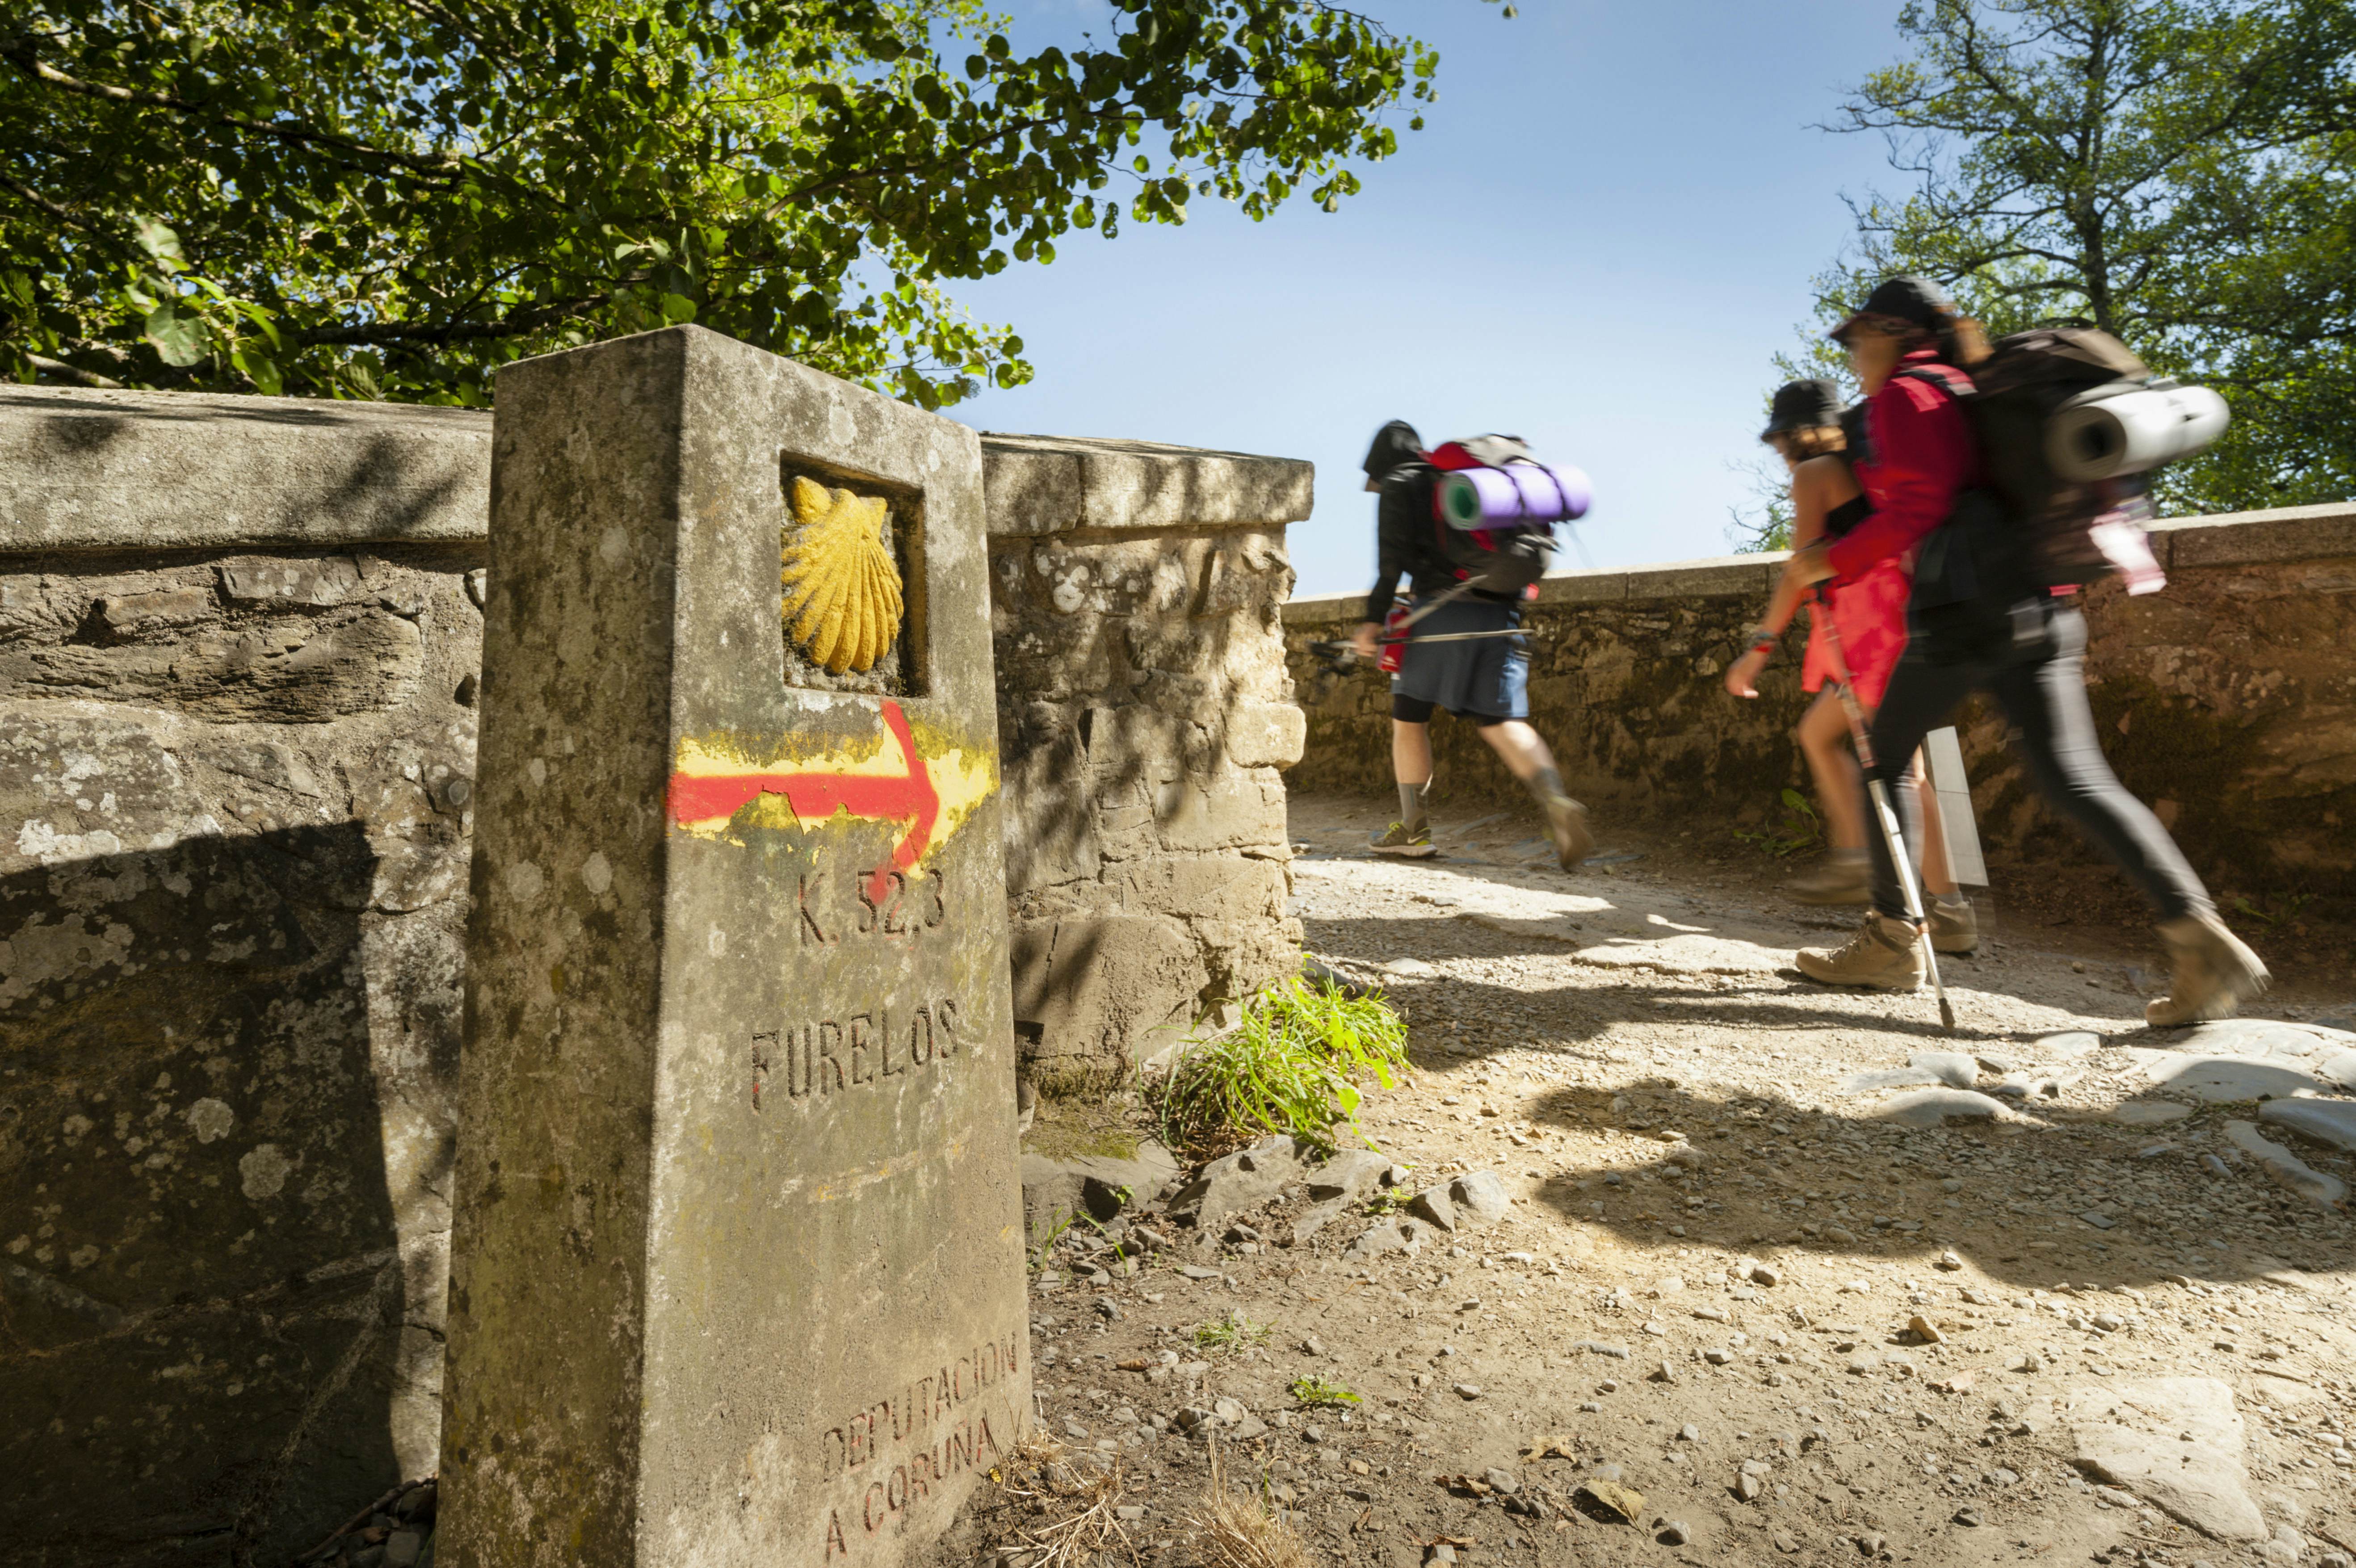 How to Do the Camino de Santiago in Less Than a Month